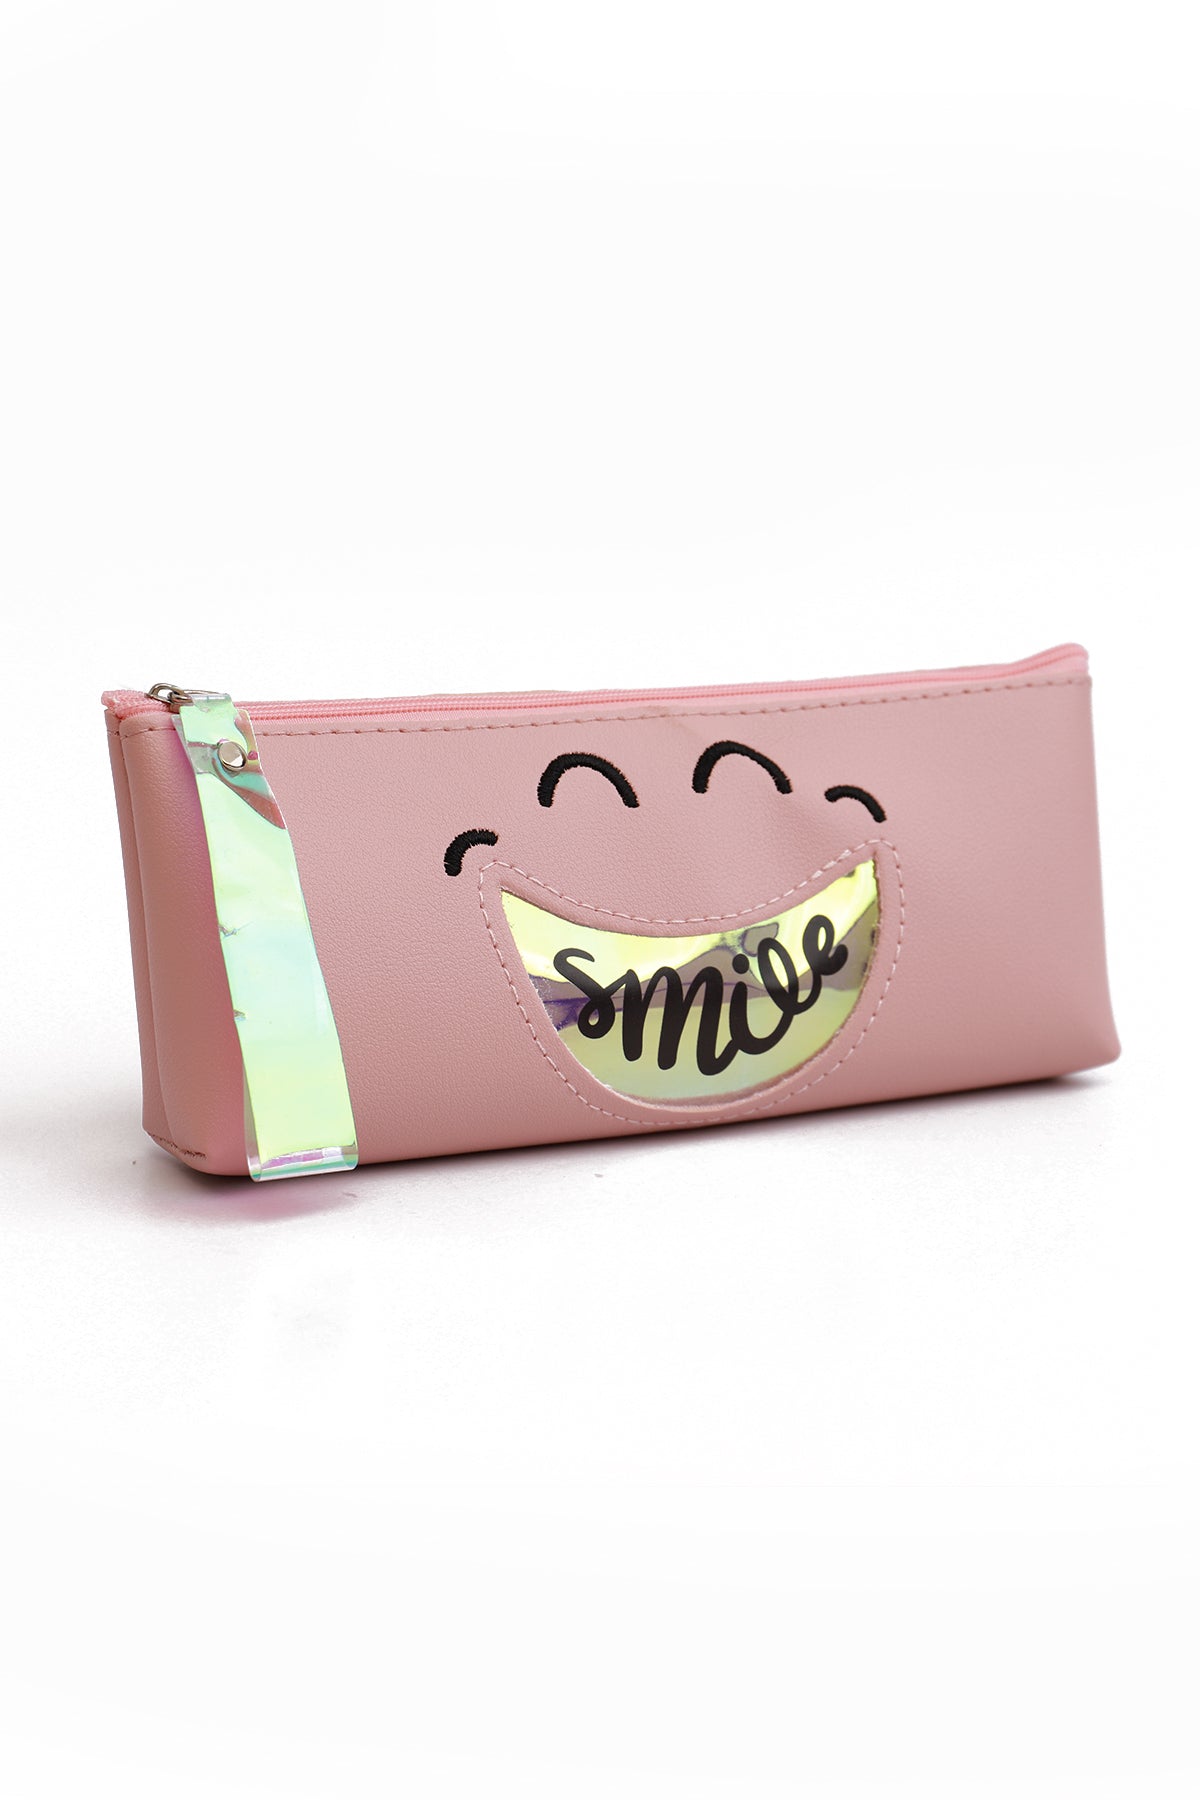 Smile Pencil Cases For Kids